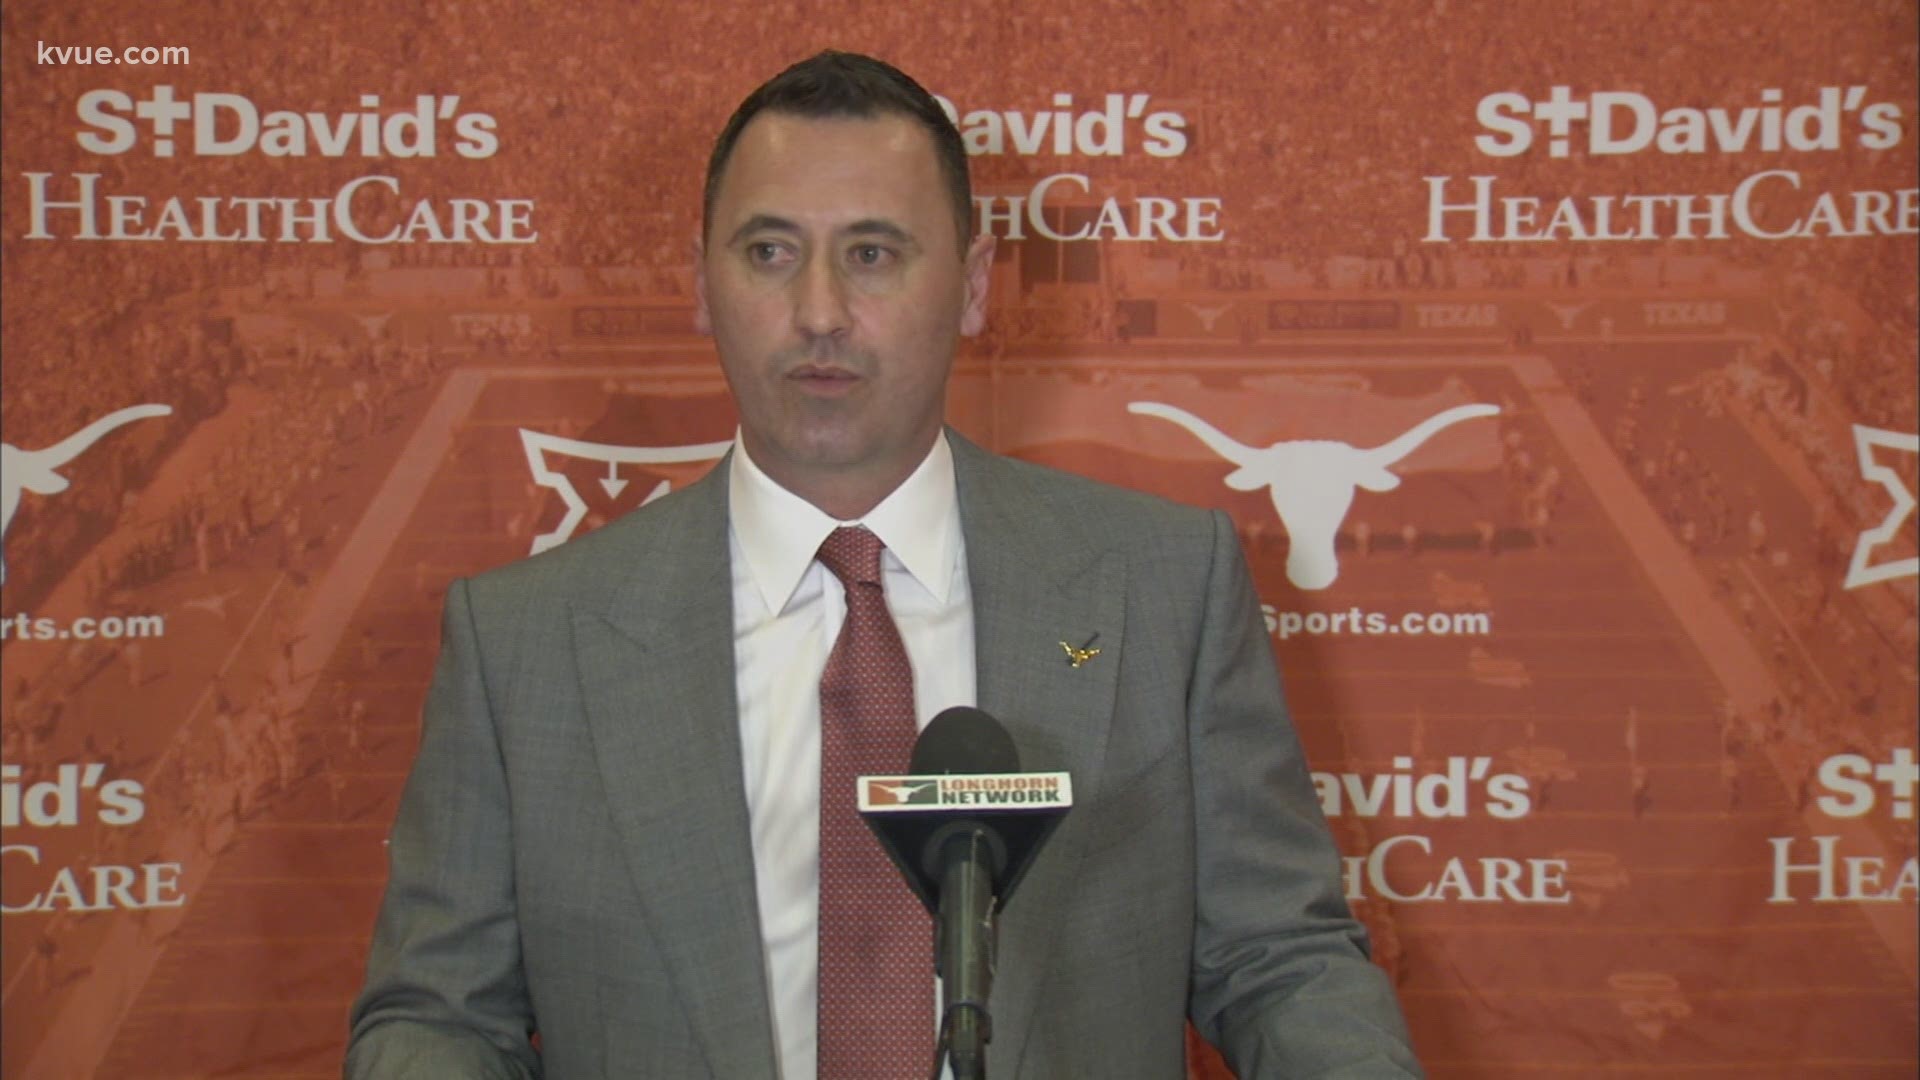 Texas Head Coach Steve Sarkisian said his top two priorities are hiring staff and recruiting players. He also touched on his past and how it motivates his future.